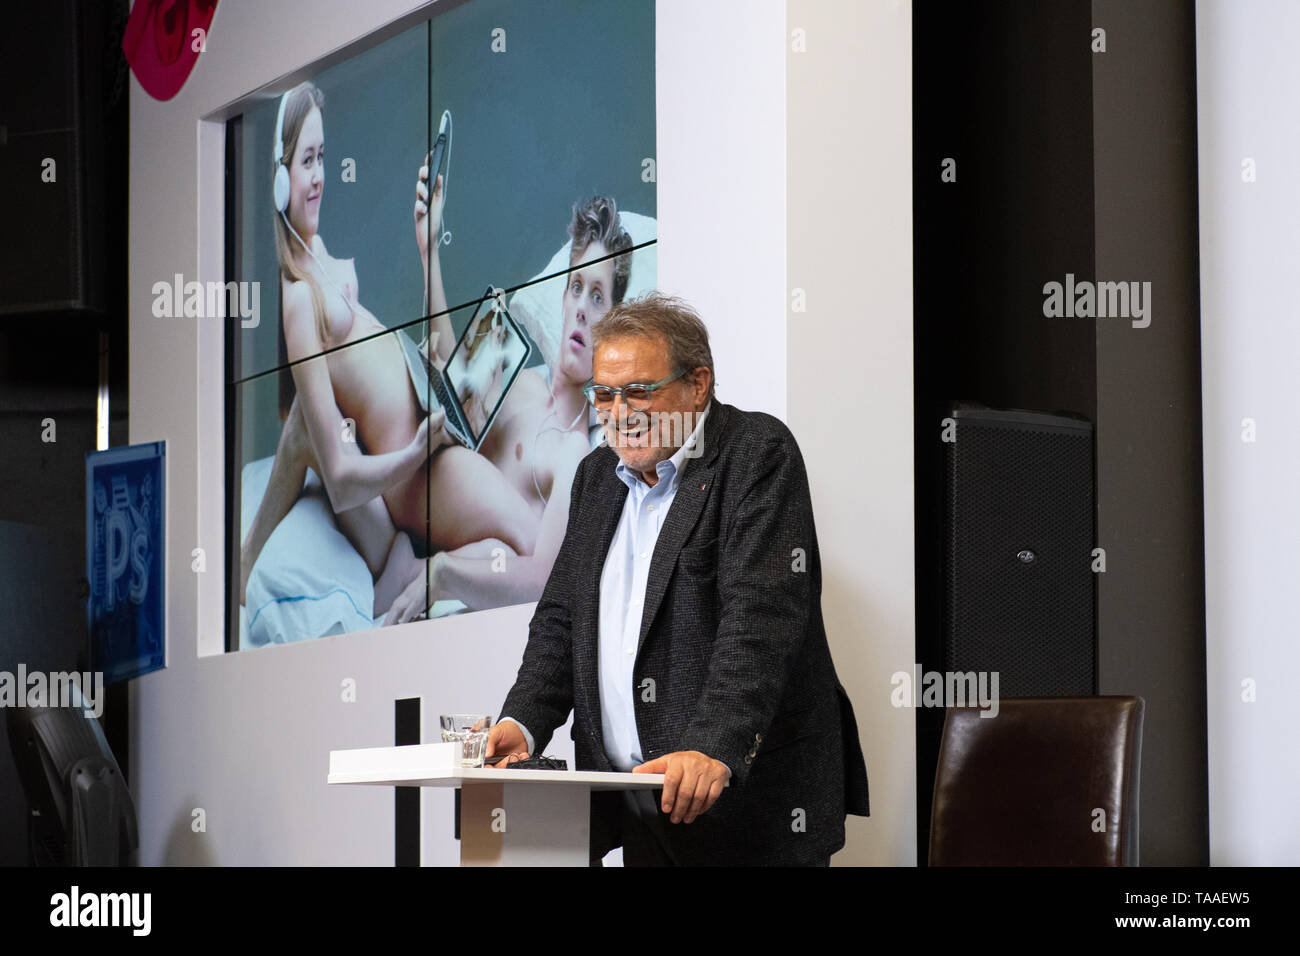 MOSCOW, RUSSIA - APRIL 24, 2018: Master class of Oliviero Toscani, an Italian photographer, best-known worldwide for designing controversial advertisi Stock Photo